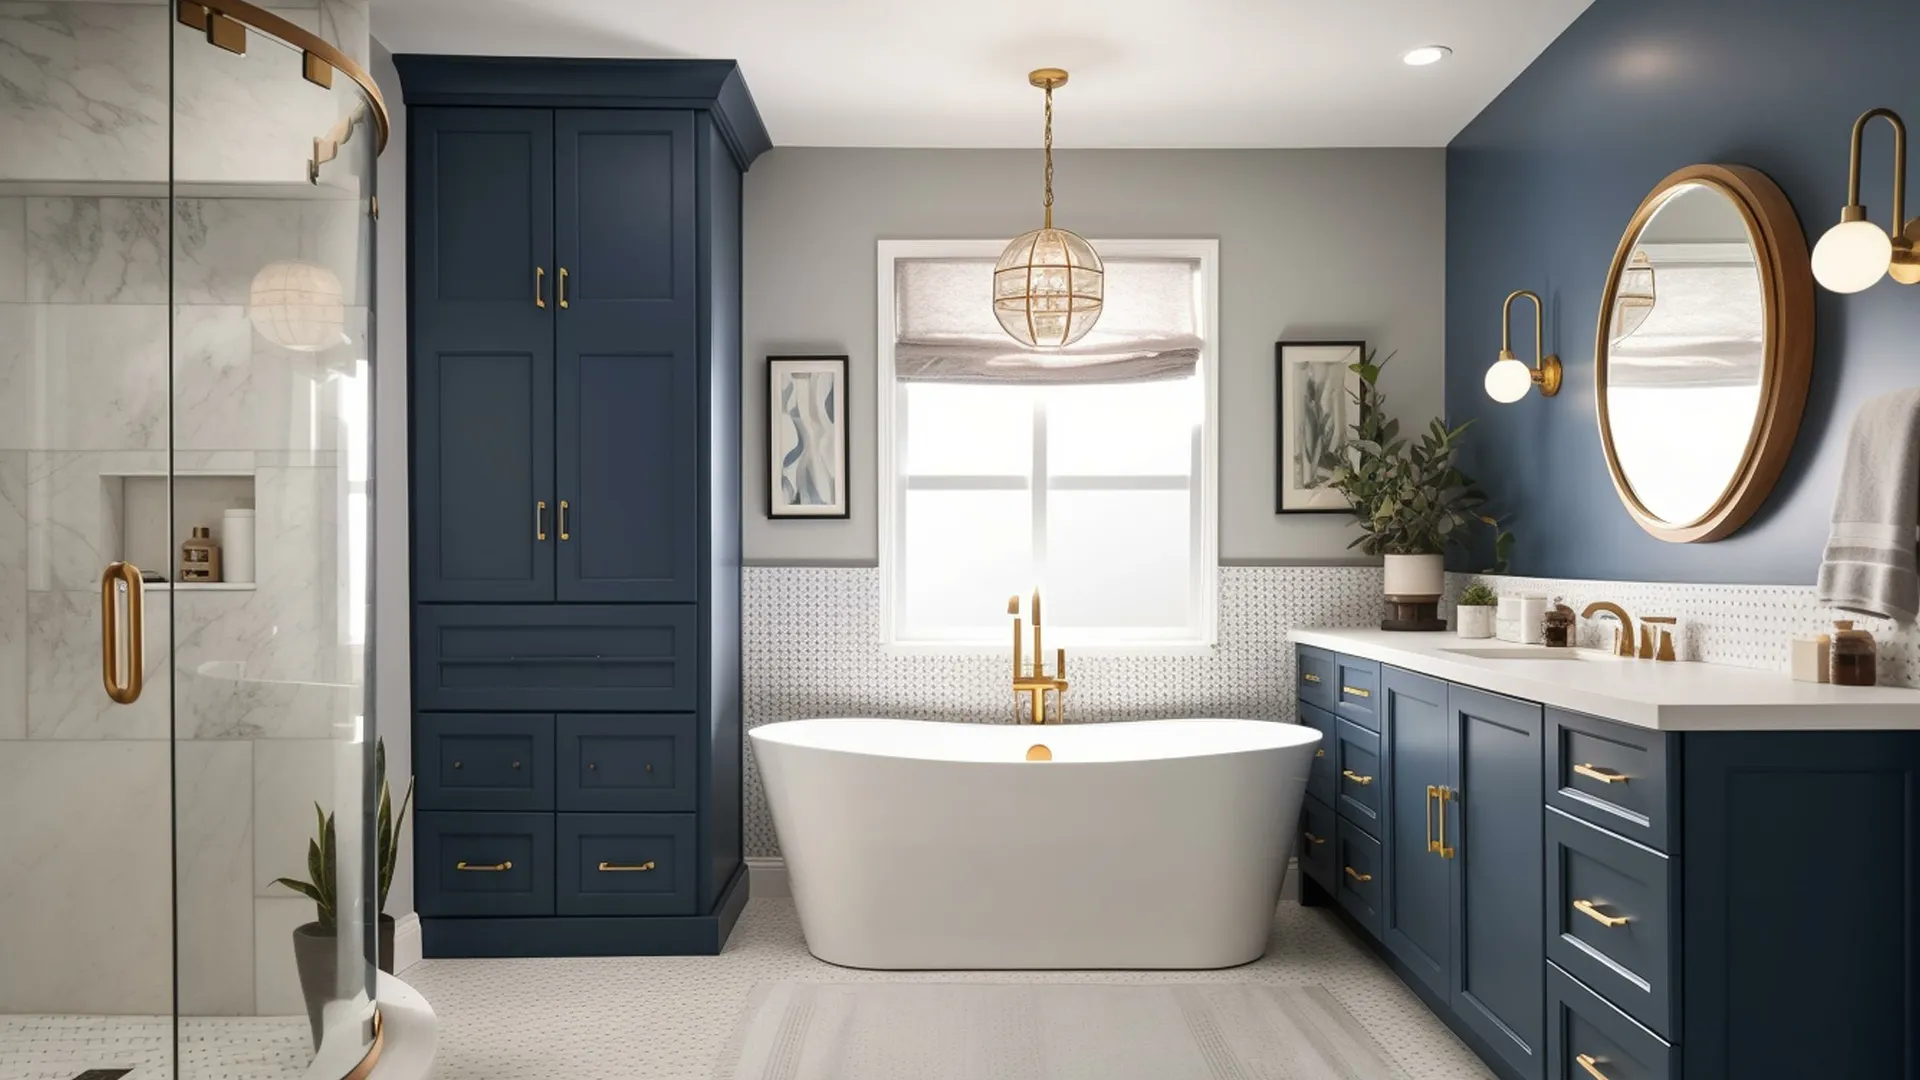 Luxury bathroom with soaking tub, gold accents, and professionally painted dark blue cabinets